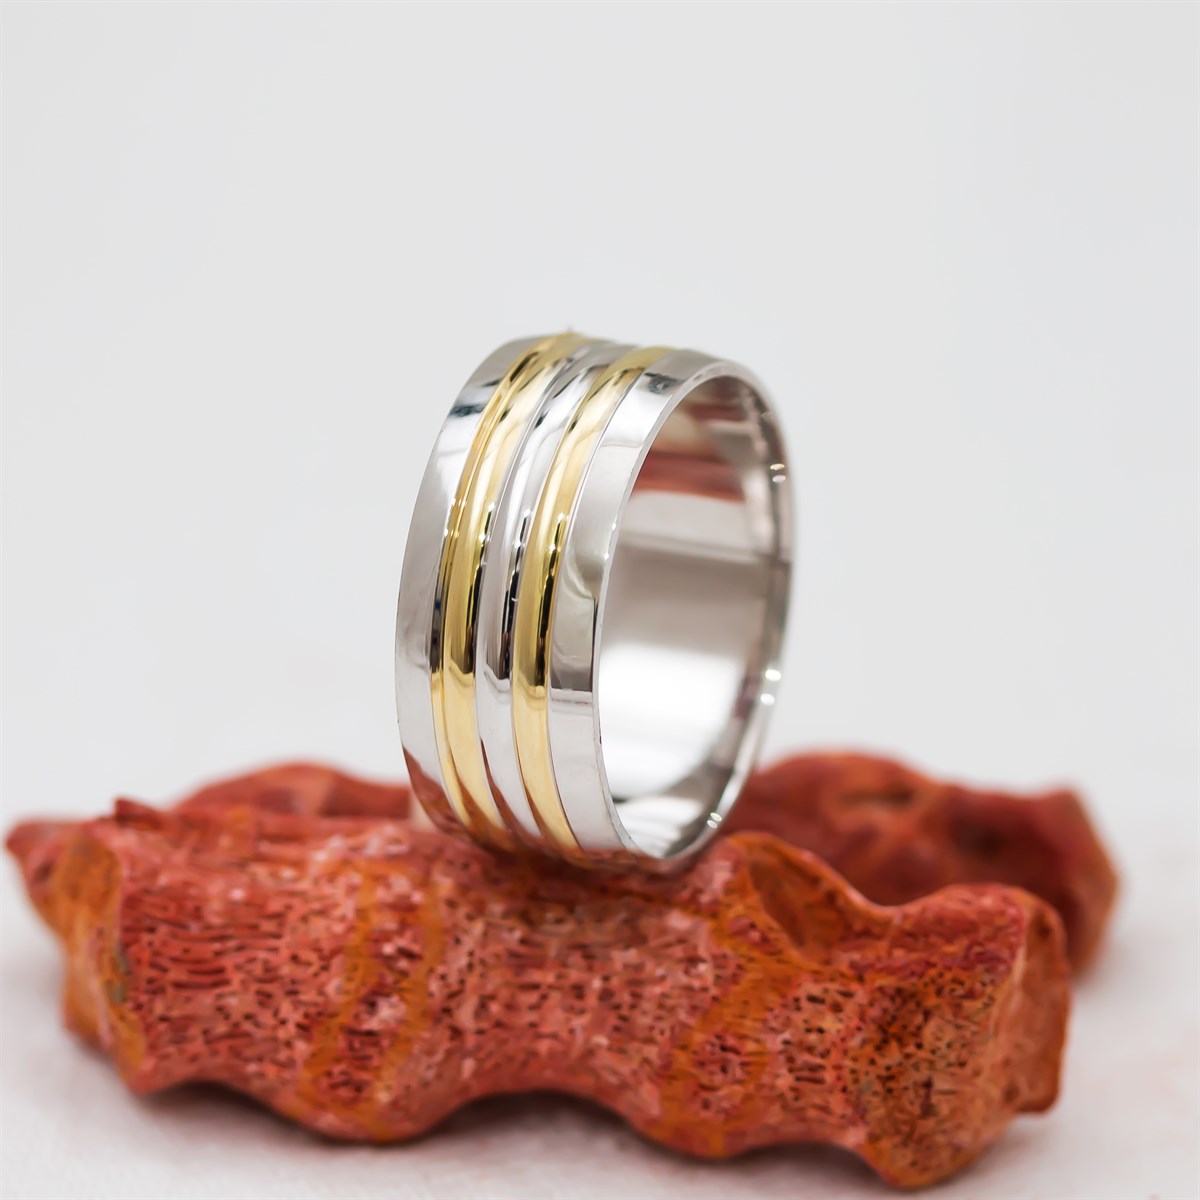 Unisex Silver Wedding Ring With Gold Color Stripe